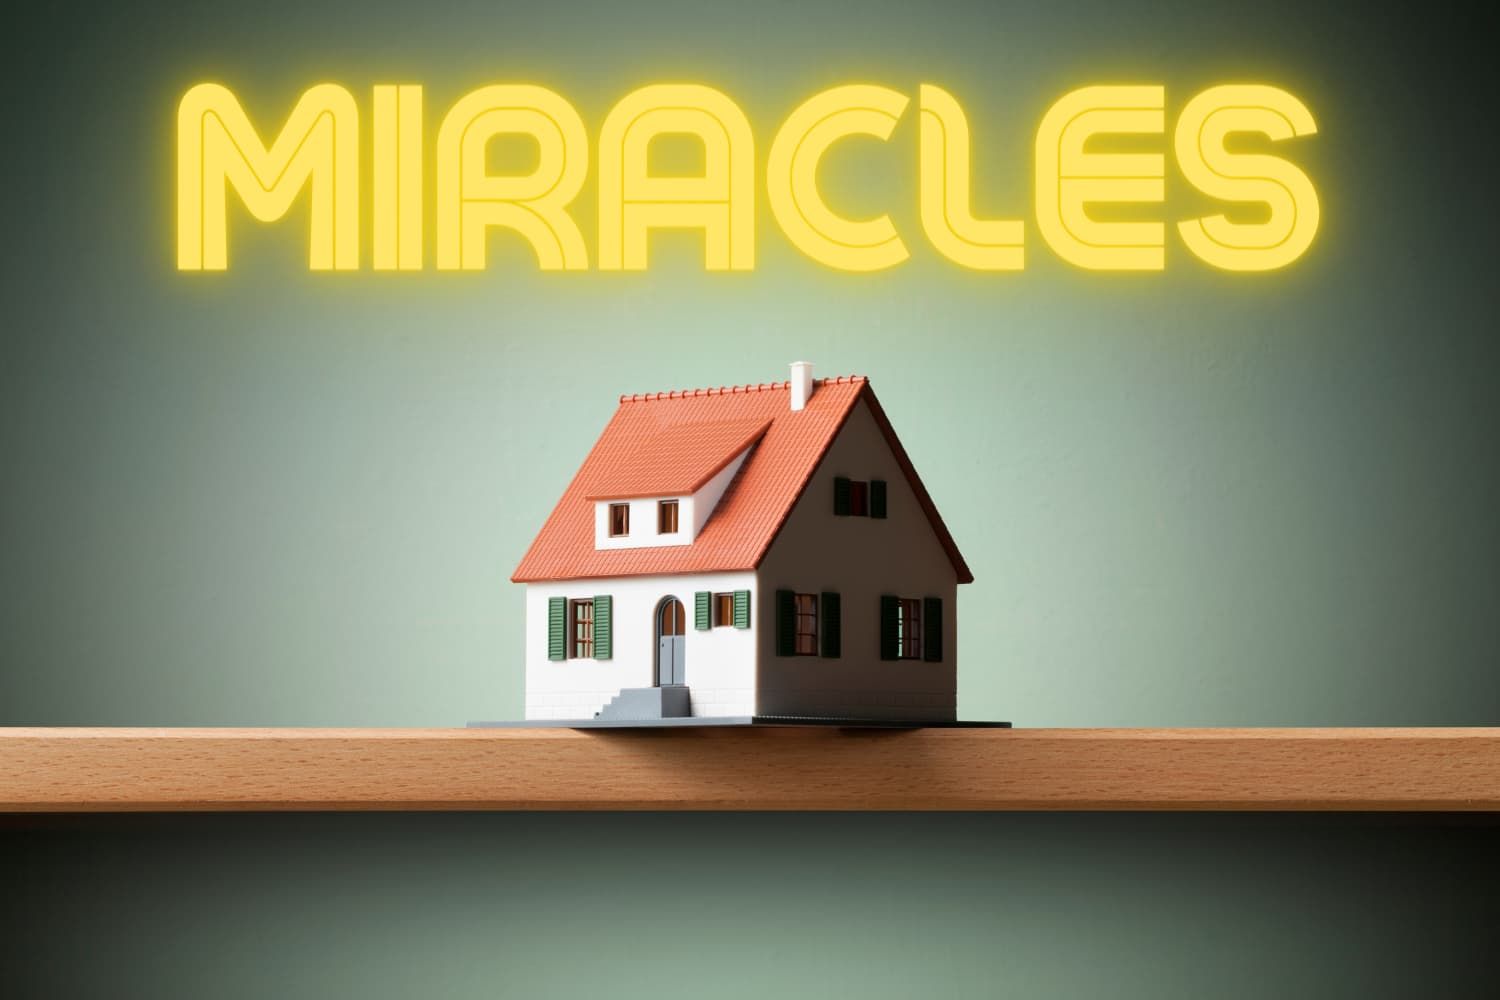 Craft%20-%20NT%20Life%20of%20Jesus%20Jairus%20daughter%20-%20A%20house%20full%20of%20miracles-cb0e0b7b Miracles